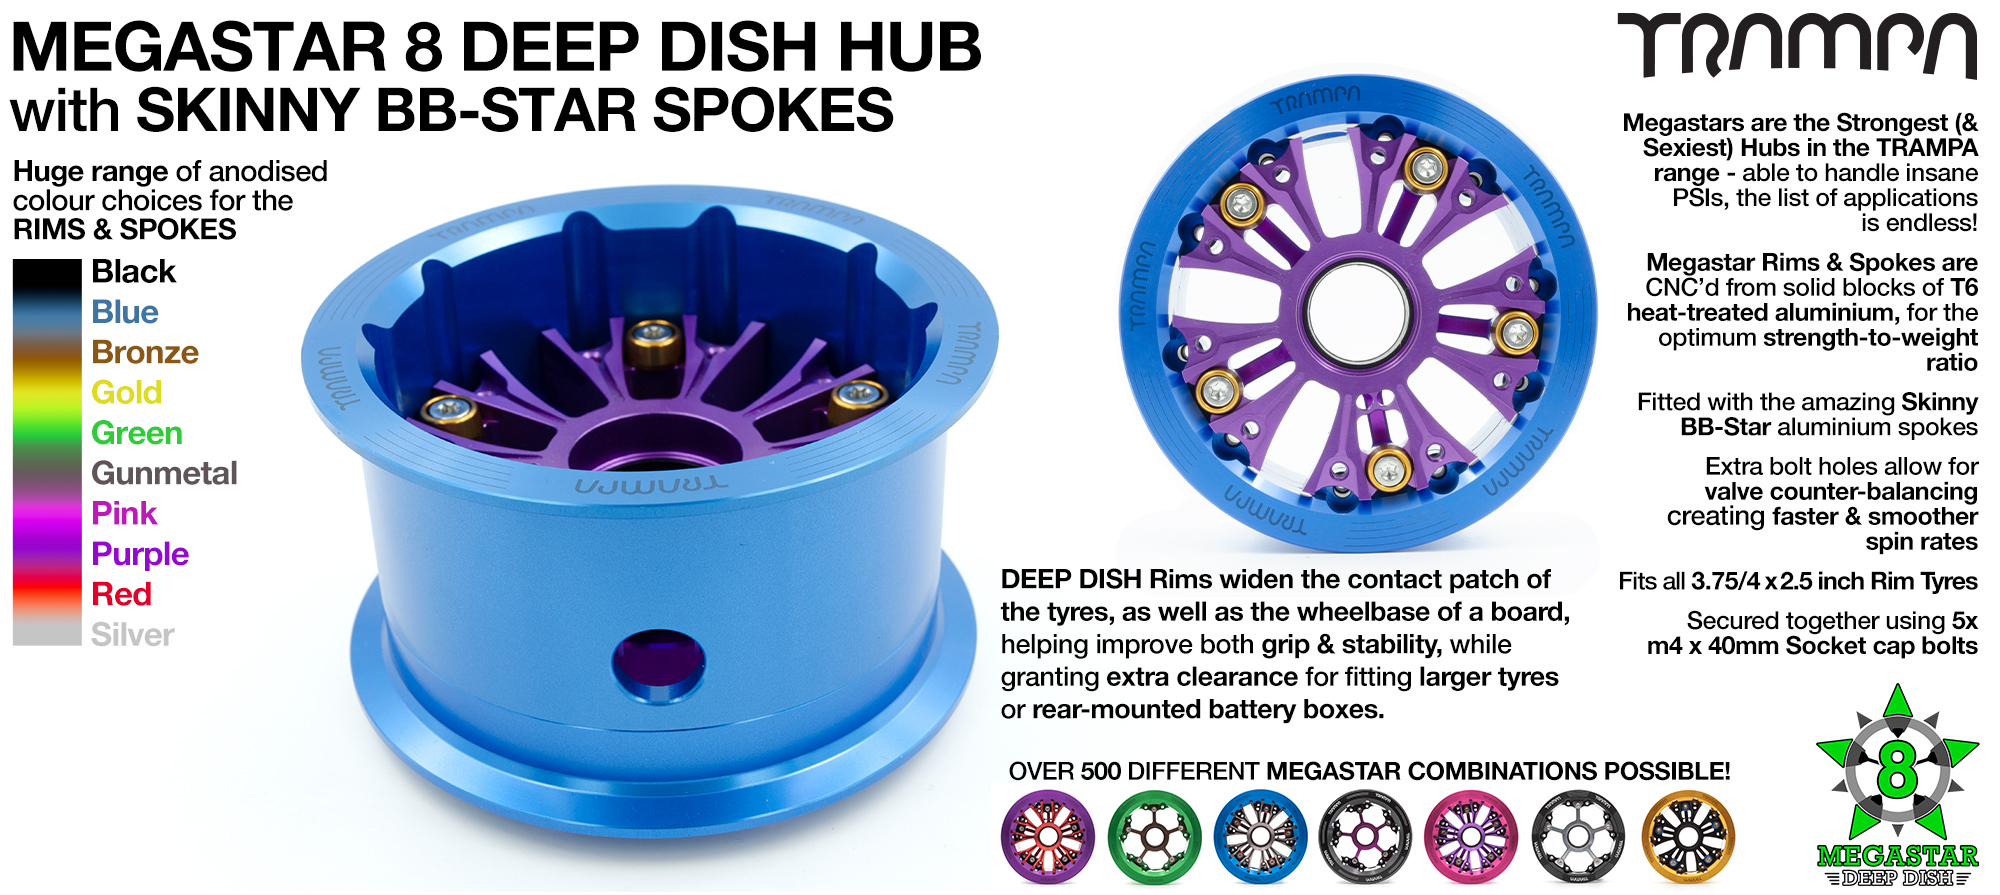 Deep-Dish MEGASTAR 8 3.75 x 2.5 Inch - Fits Pneumatic tyres up to 8 Inches in outer diameter 